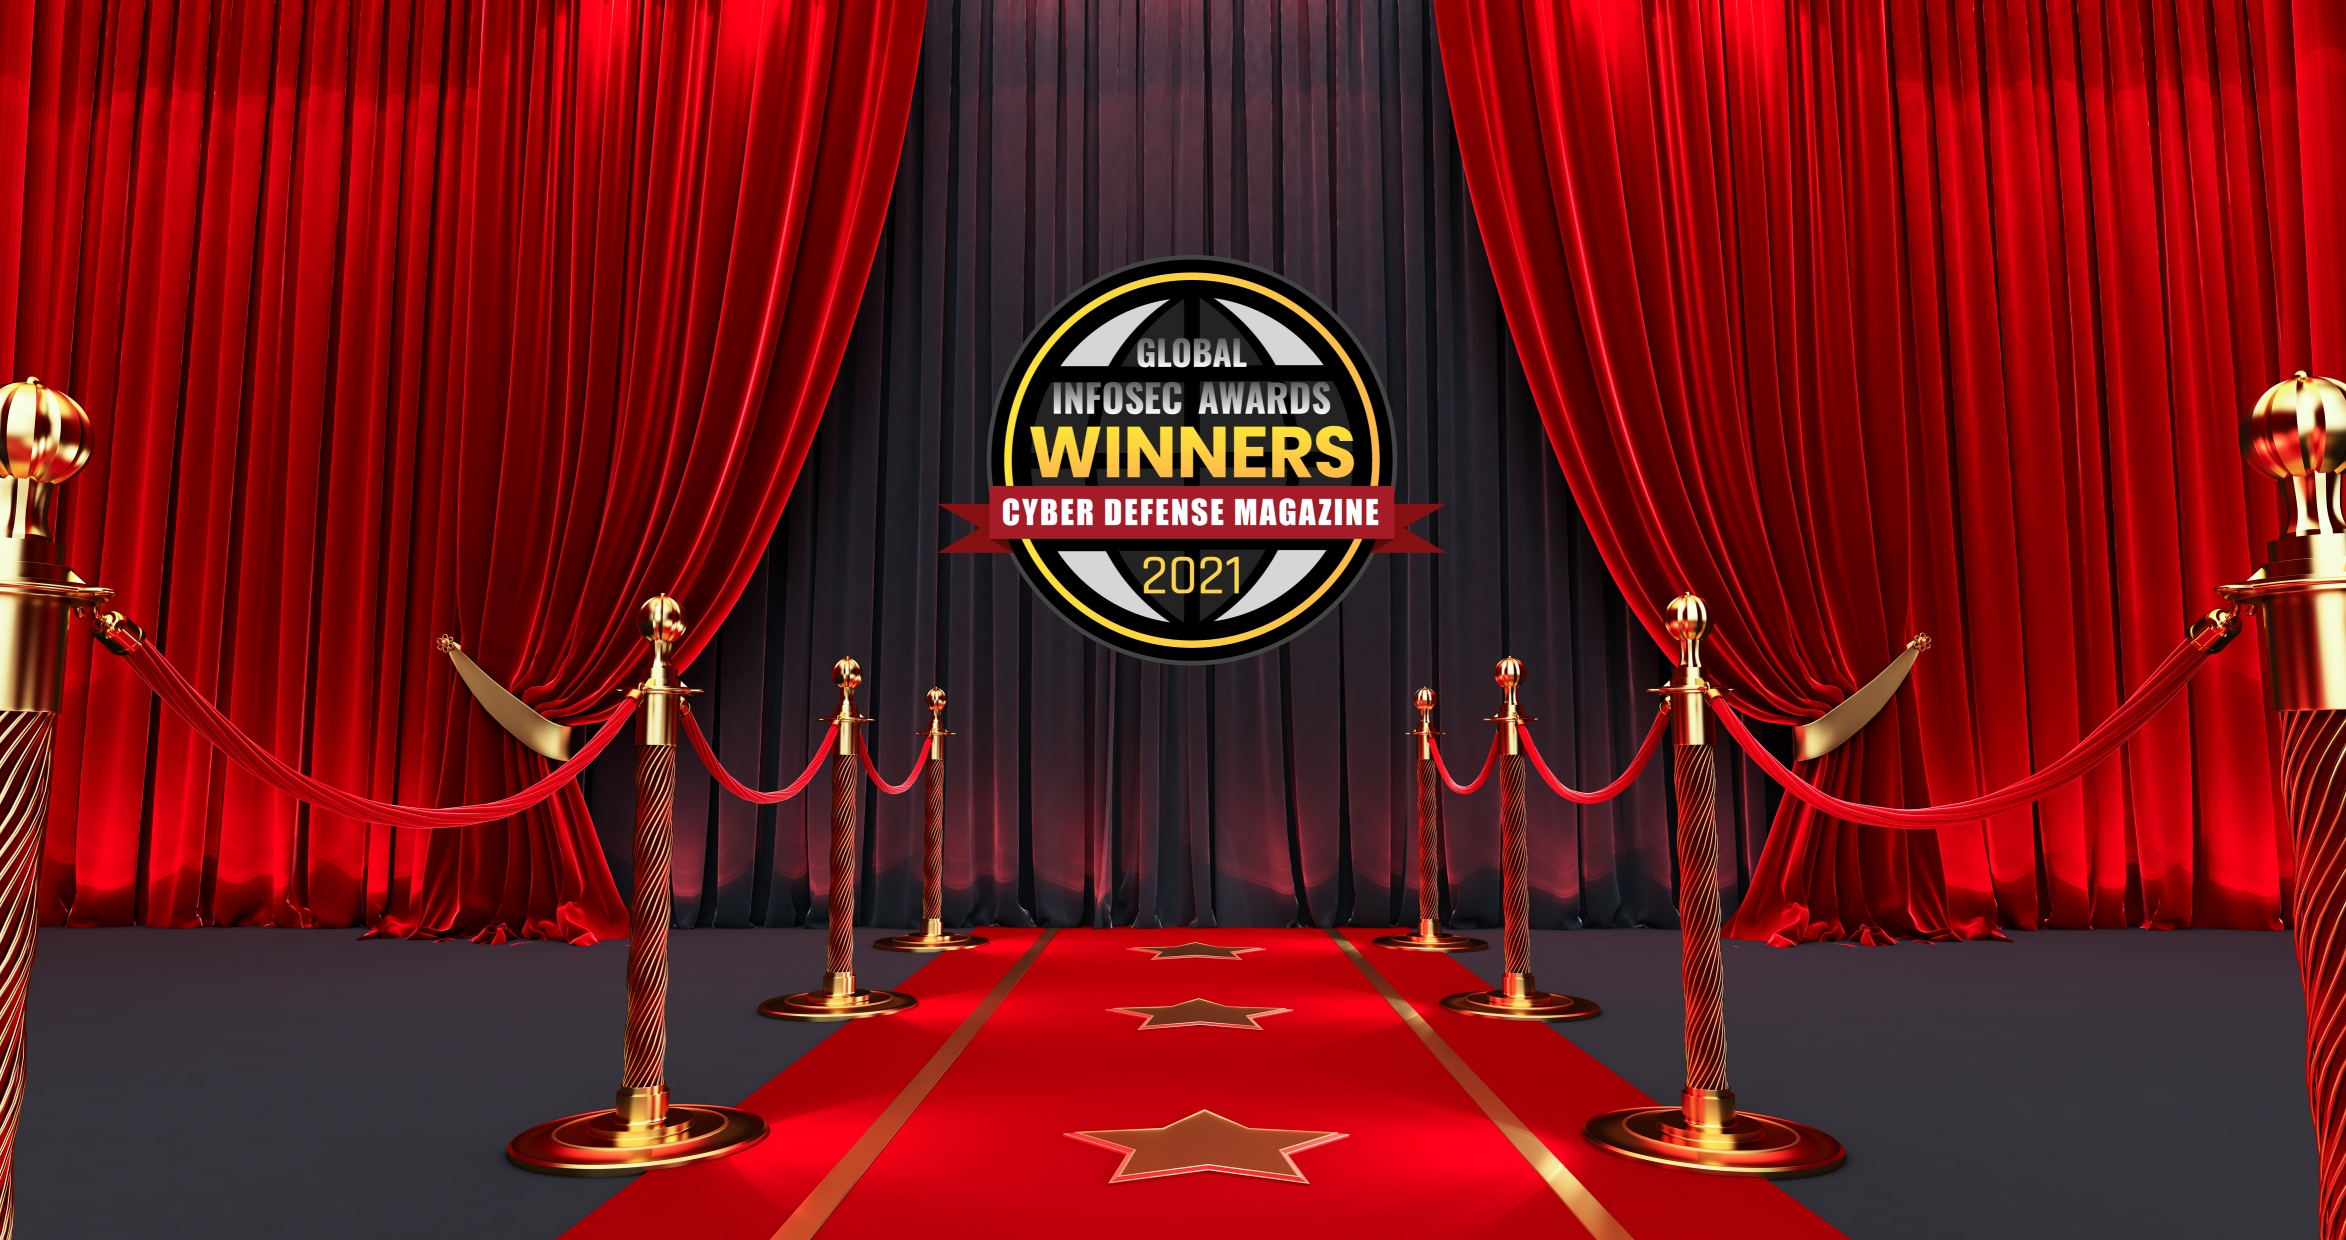 Cyber Defense Magazine Announces Winners of the Global InfoSec Awards 2021